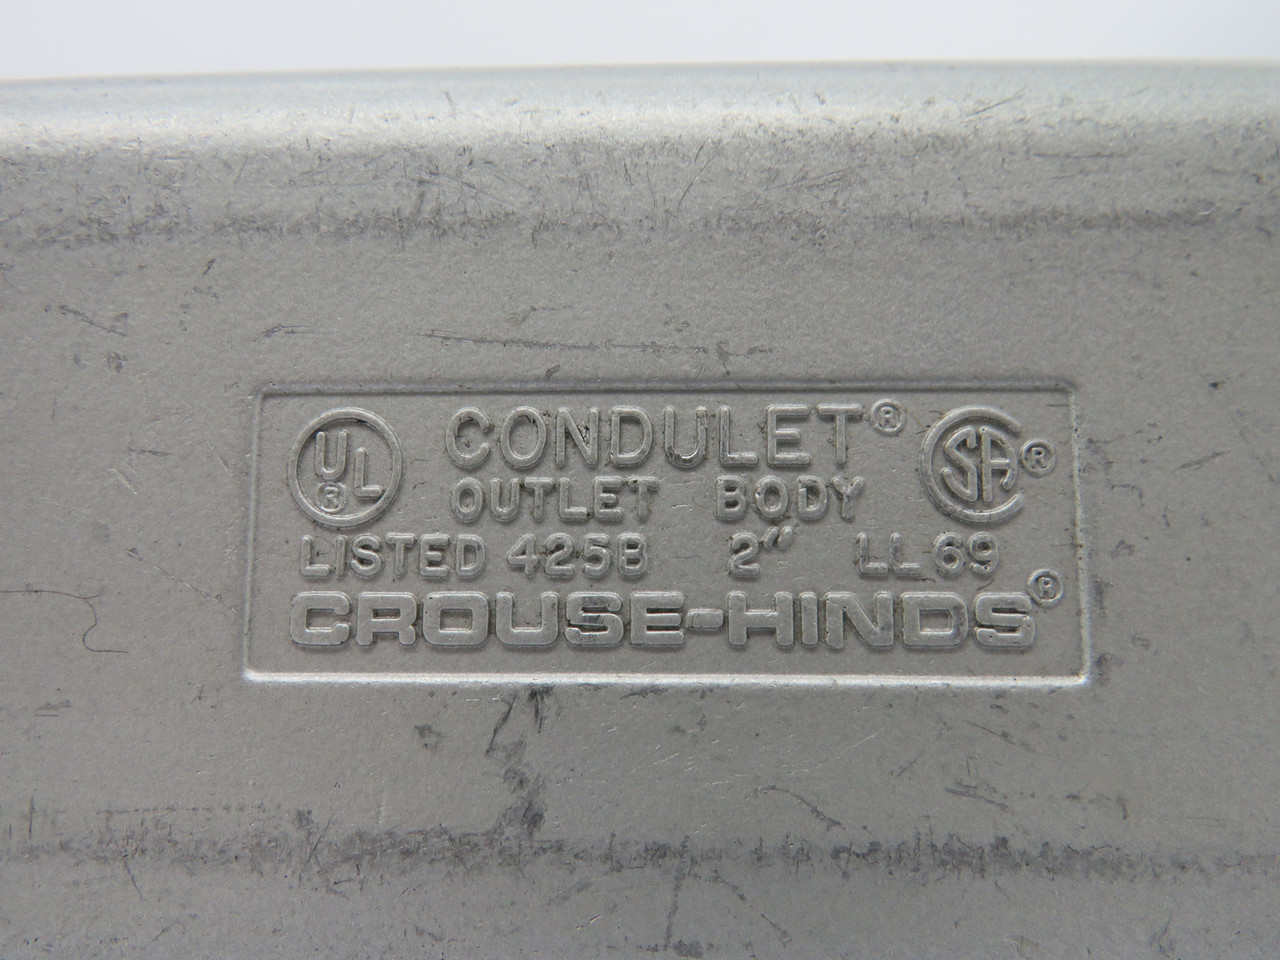 Crouse-Hinds LL69 Conduit Body 2" USED